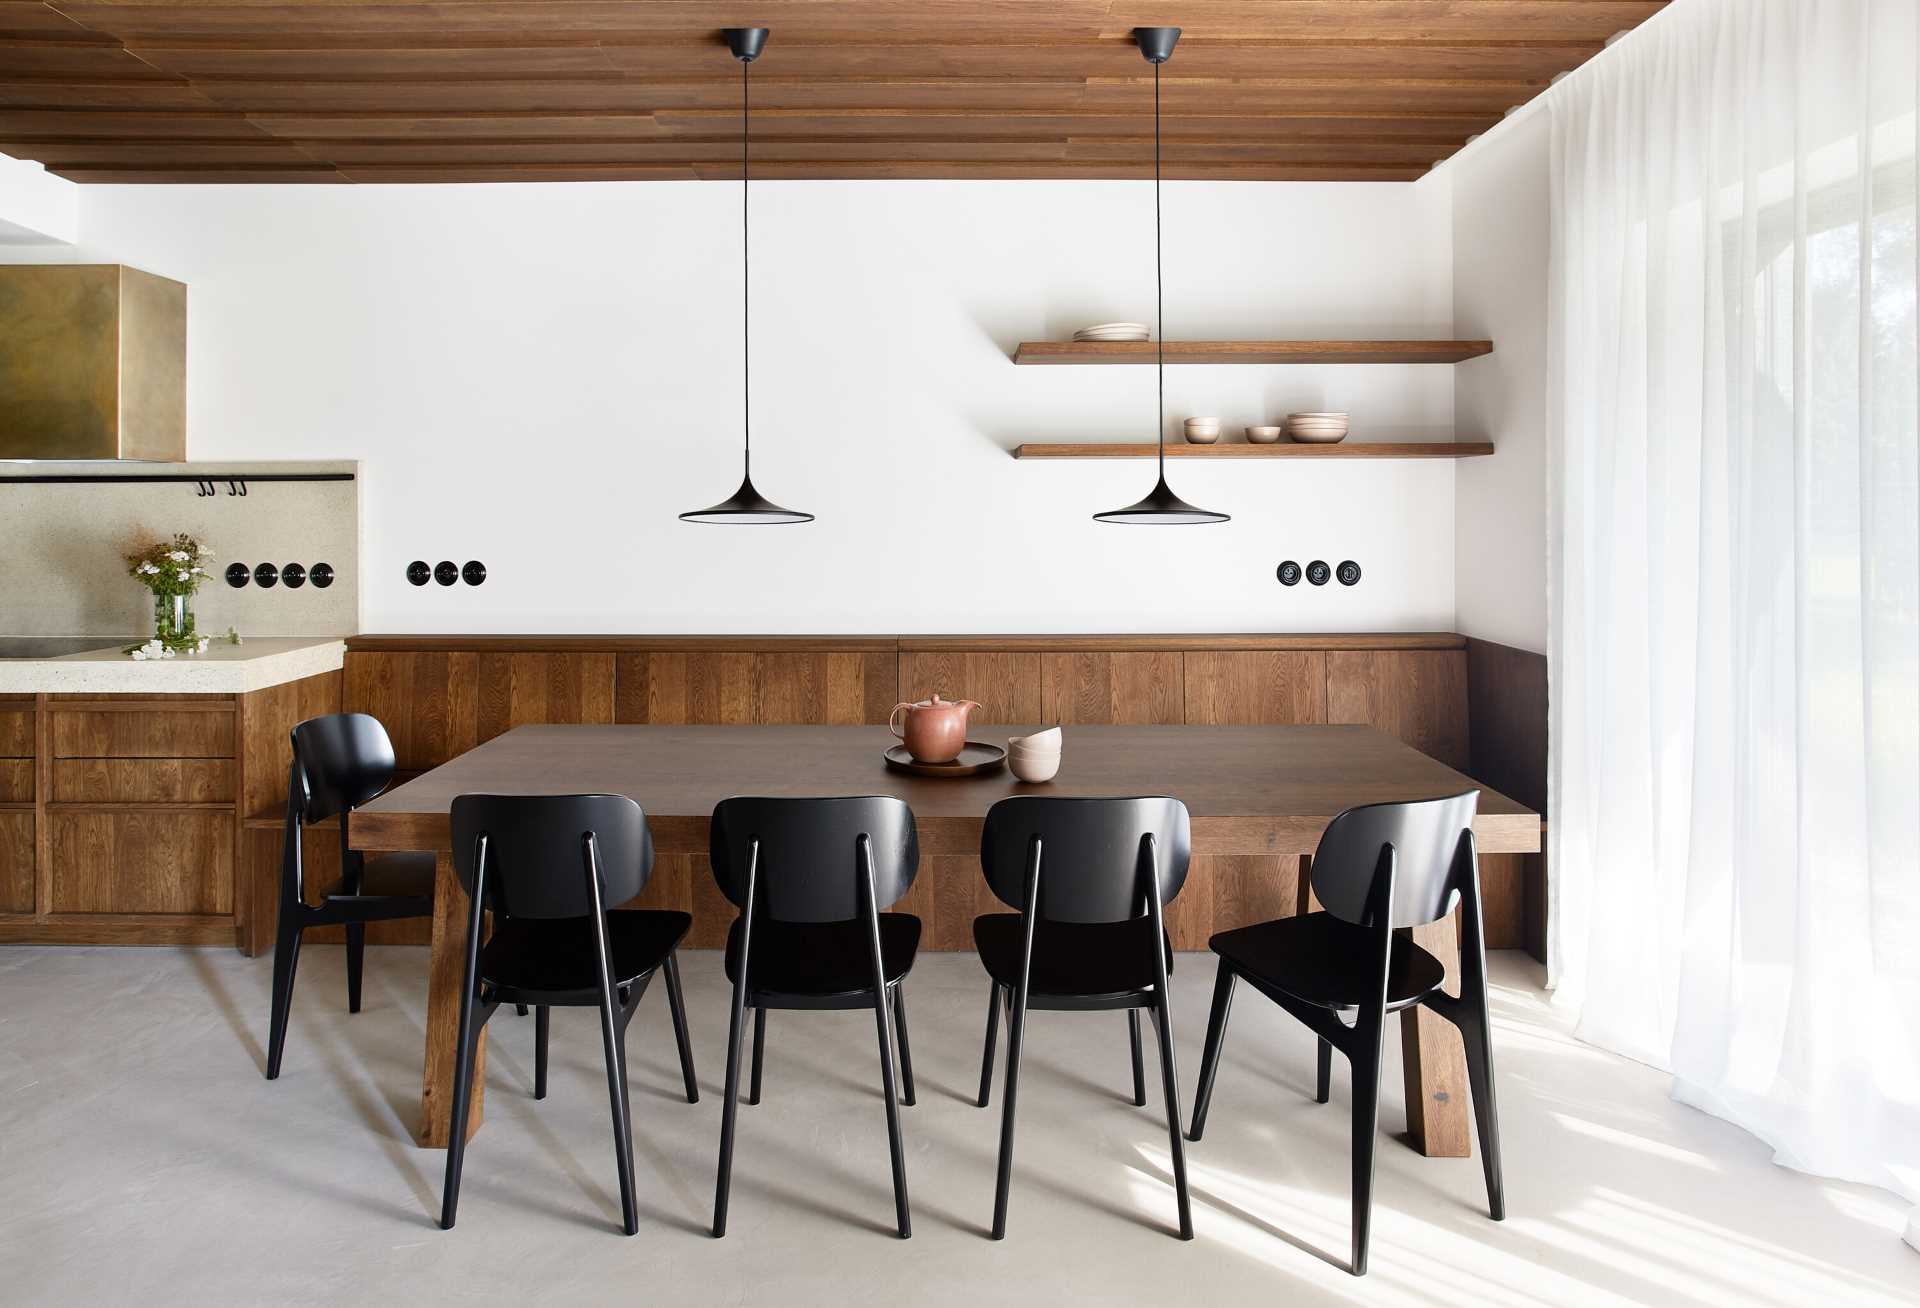 A modern open plan dining area includes a built-in wood banquette that creates plenty of seating for the owners and their guests when they are visiting on holiday.